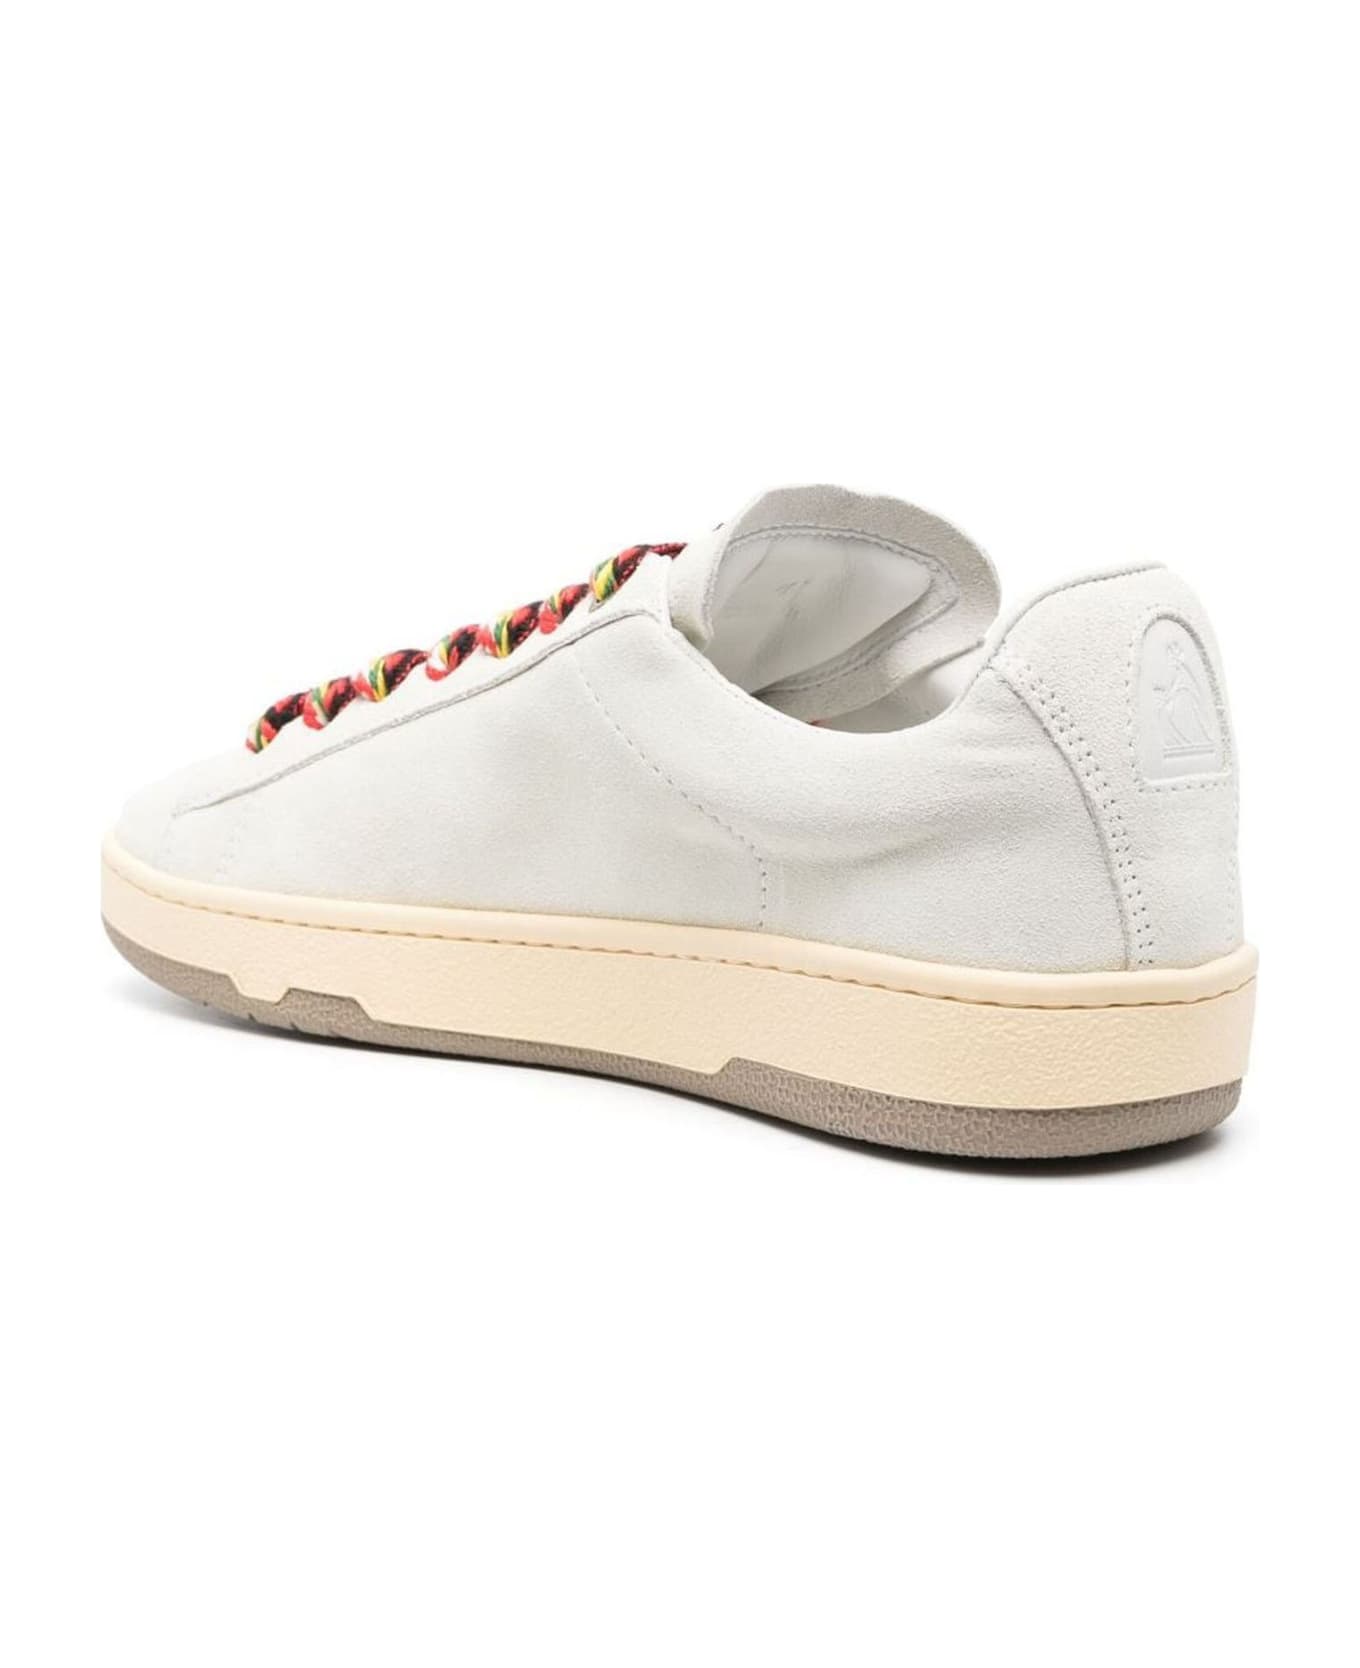 Lanvin White Suede Lite Curb Sneakers スニーカー